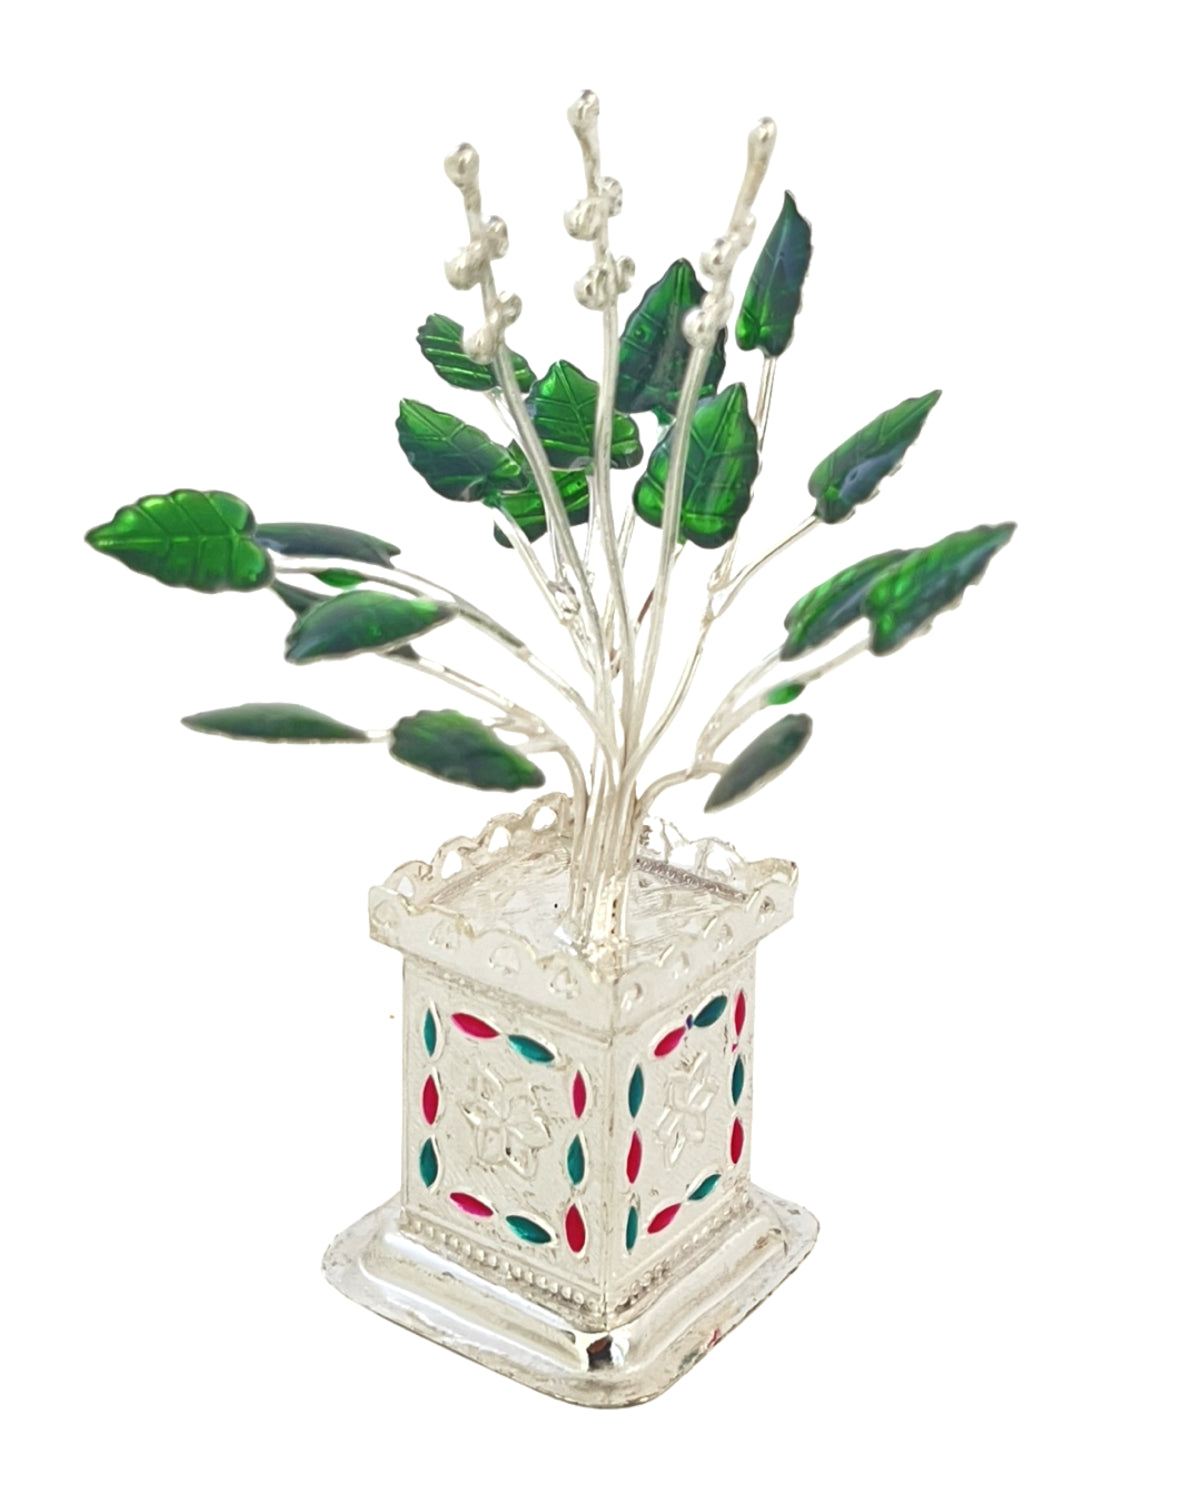 silver Tulsi plant, Silver Tulsi plant for pooja room